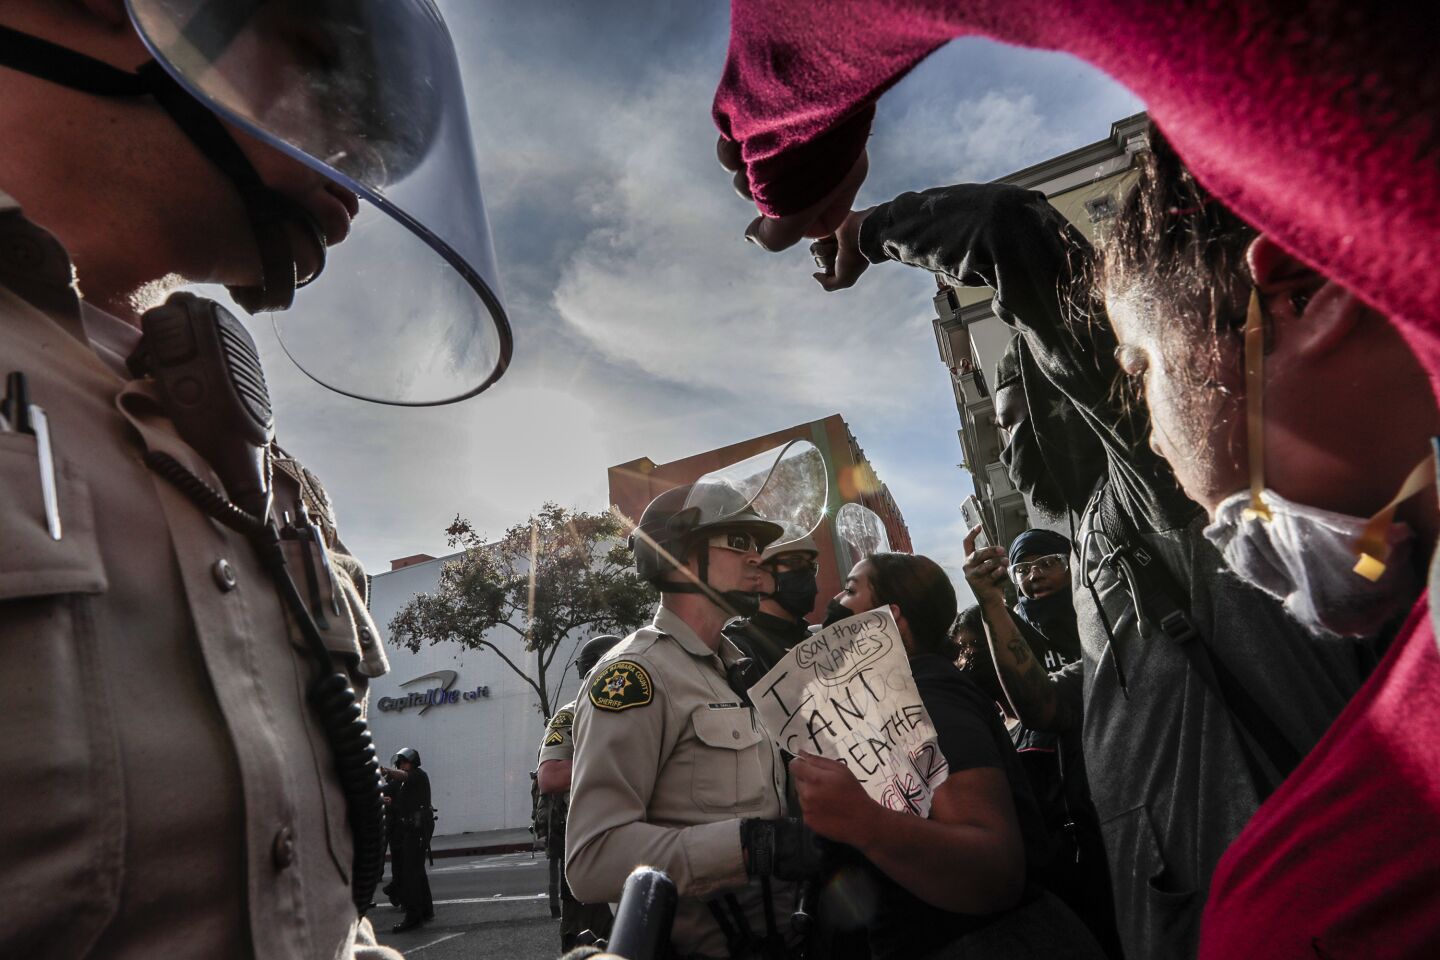 Protesters face off with police in Santa Monica on Sunday.